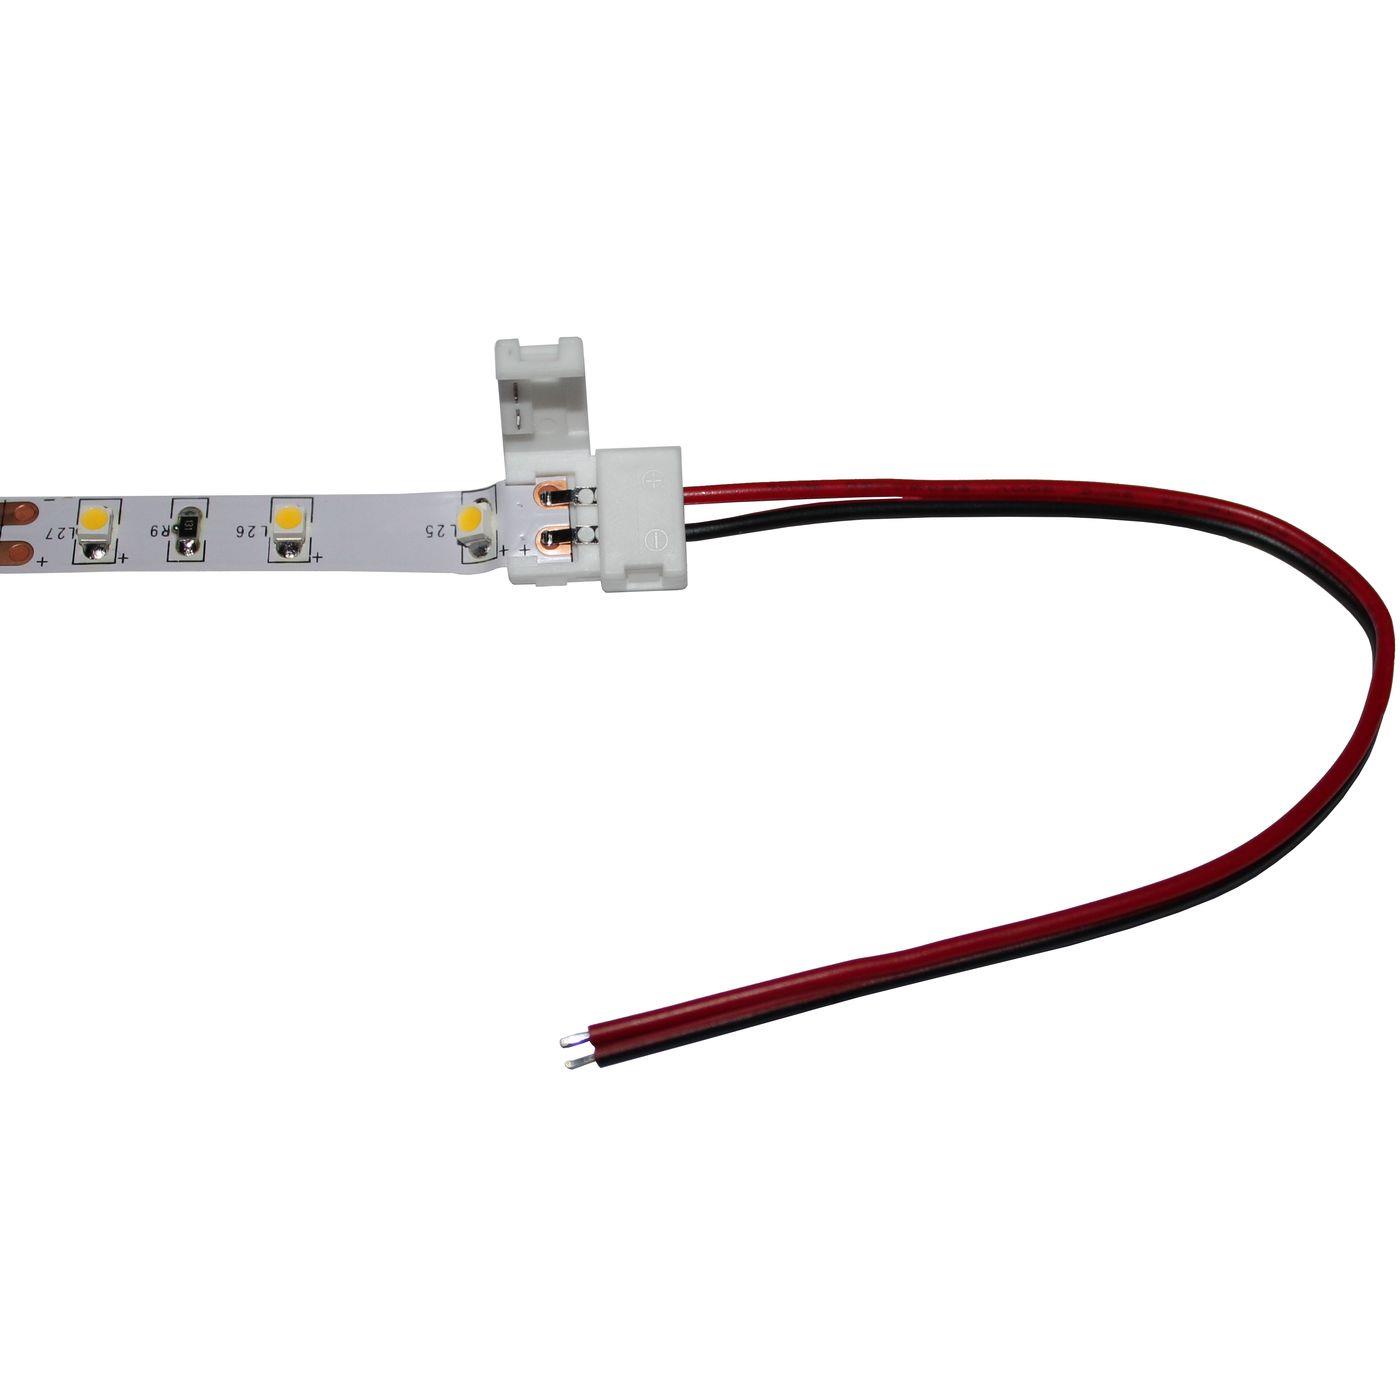 15cm LED Clip Connector with Cable for 8mm LED Strip 13x5mm for single-colour LED strips 2-Pin